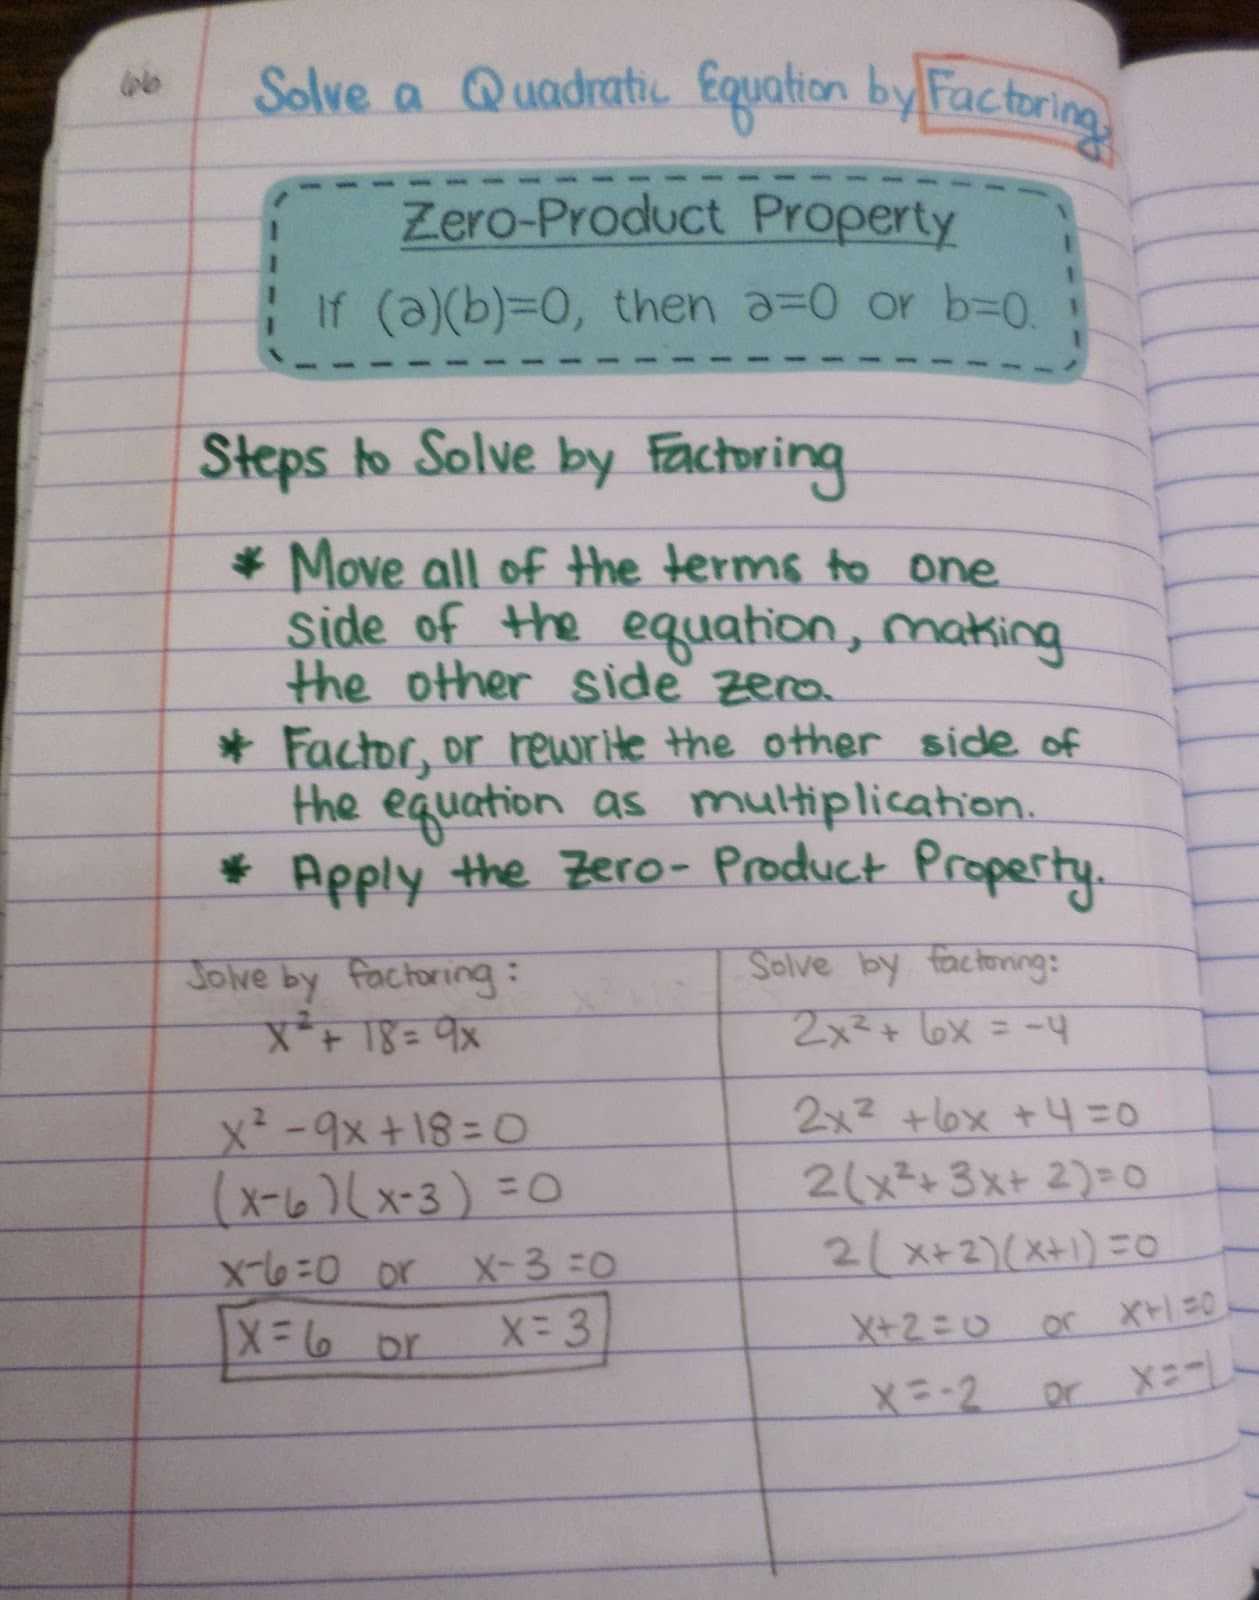 Algebra 2 Factoring Worksheet together with Math = Love solving Quadratics by Factoring and the Zero Product